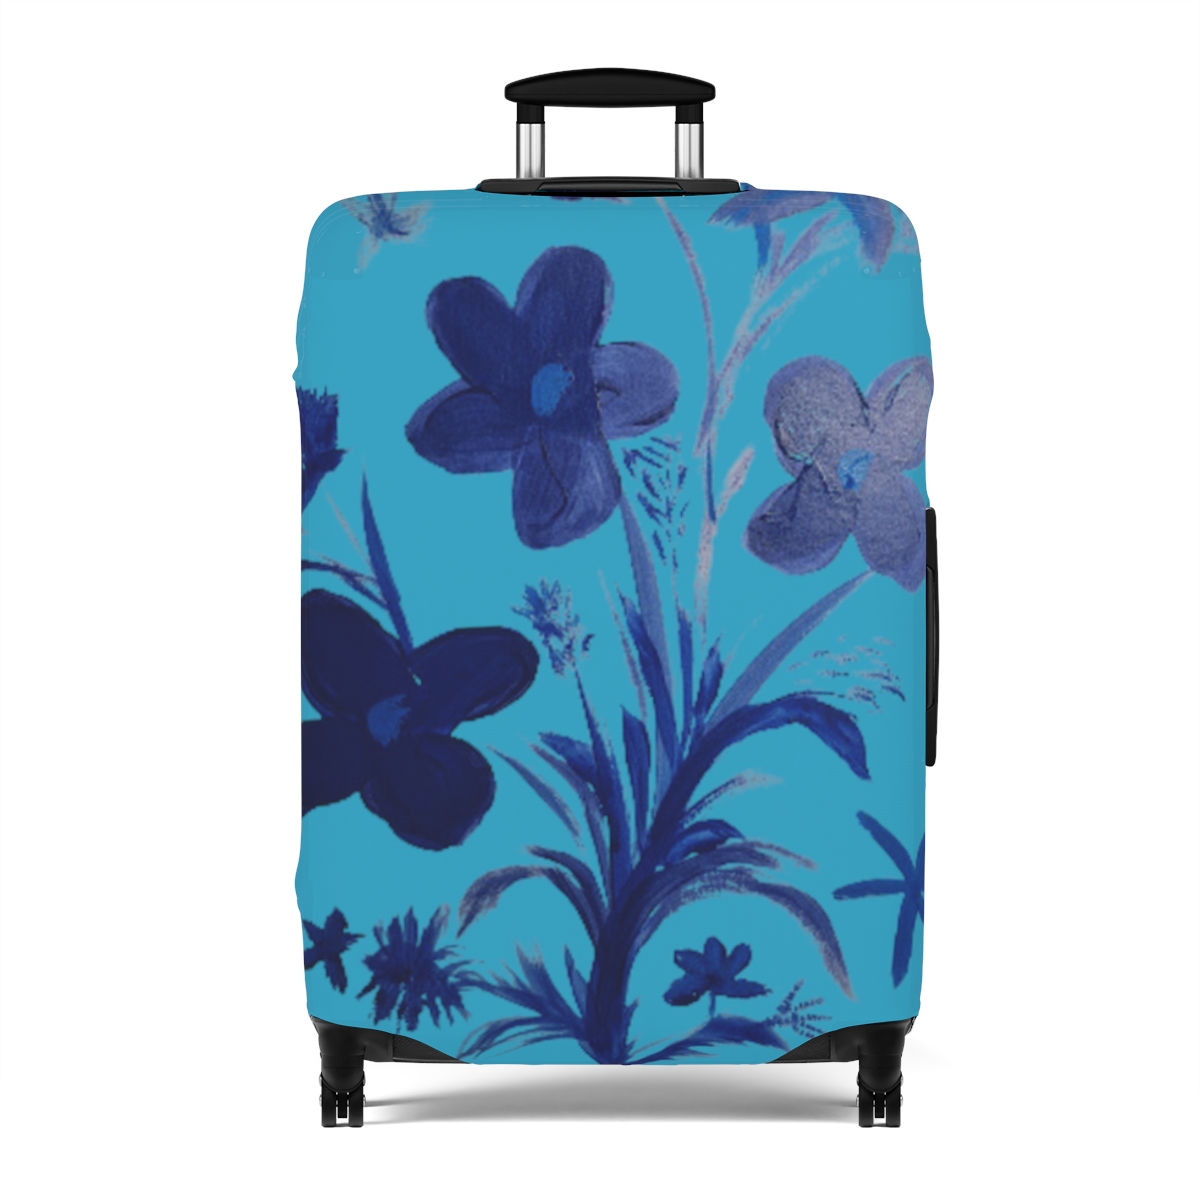 Blu Luggage Cover product thumbnail image